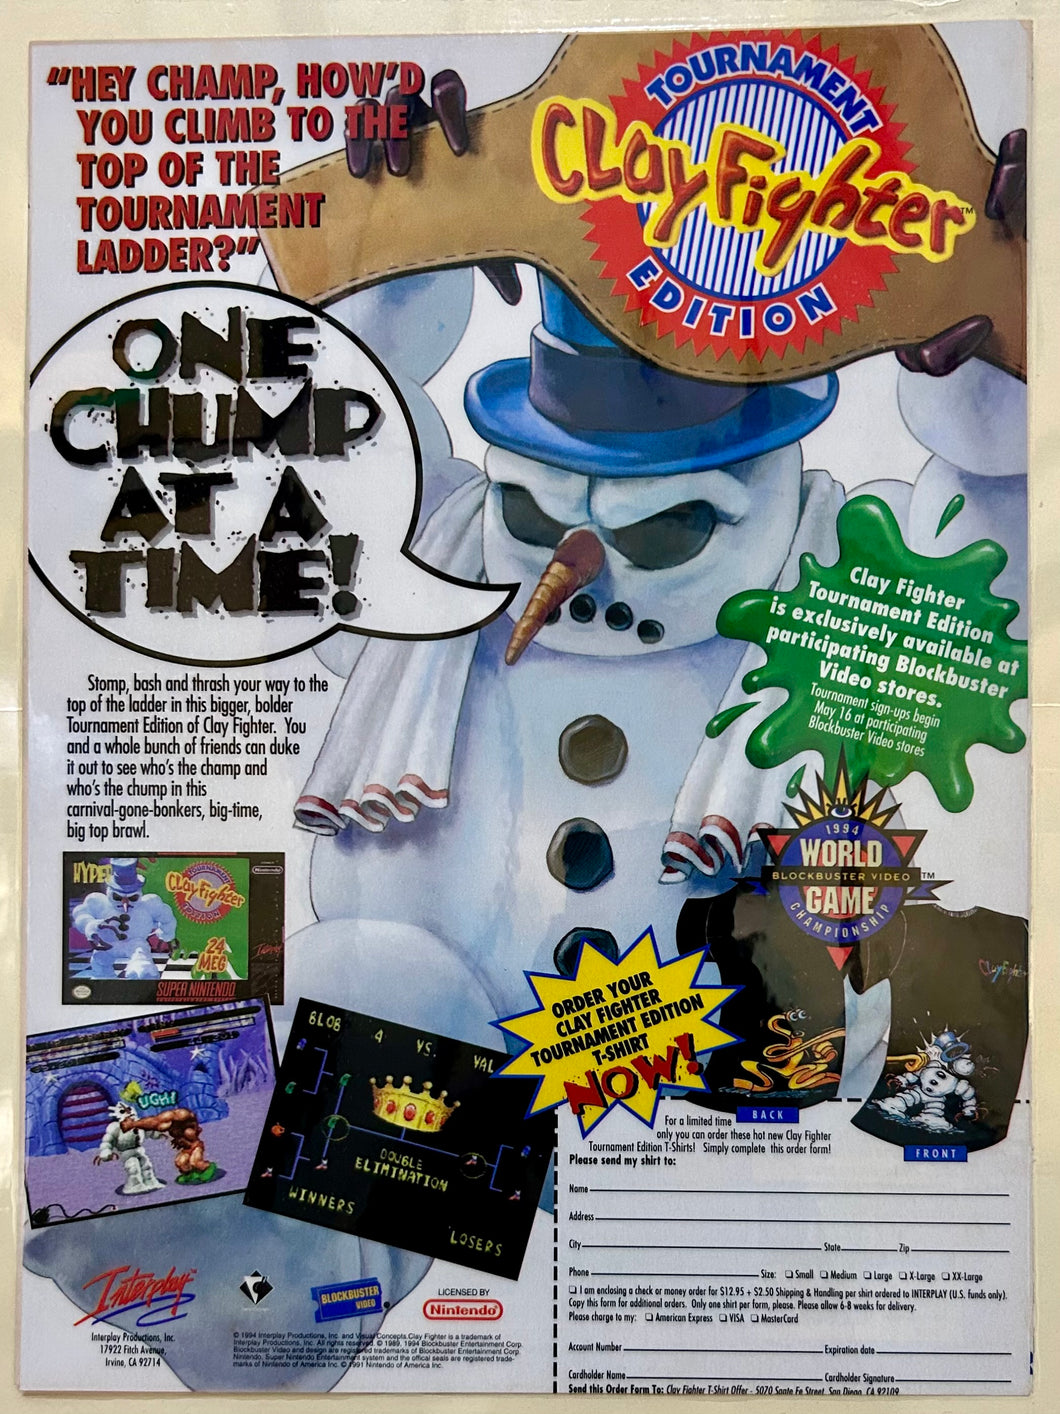 Clay Fighter Tournament Edition - SNES - Original Vintage Advertisement - Print Ads - Laminated A4 Poster